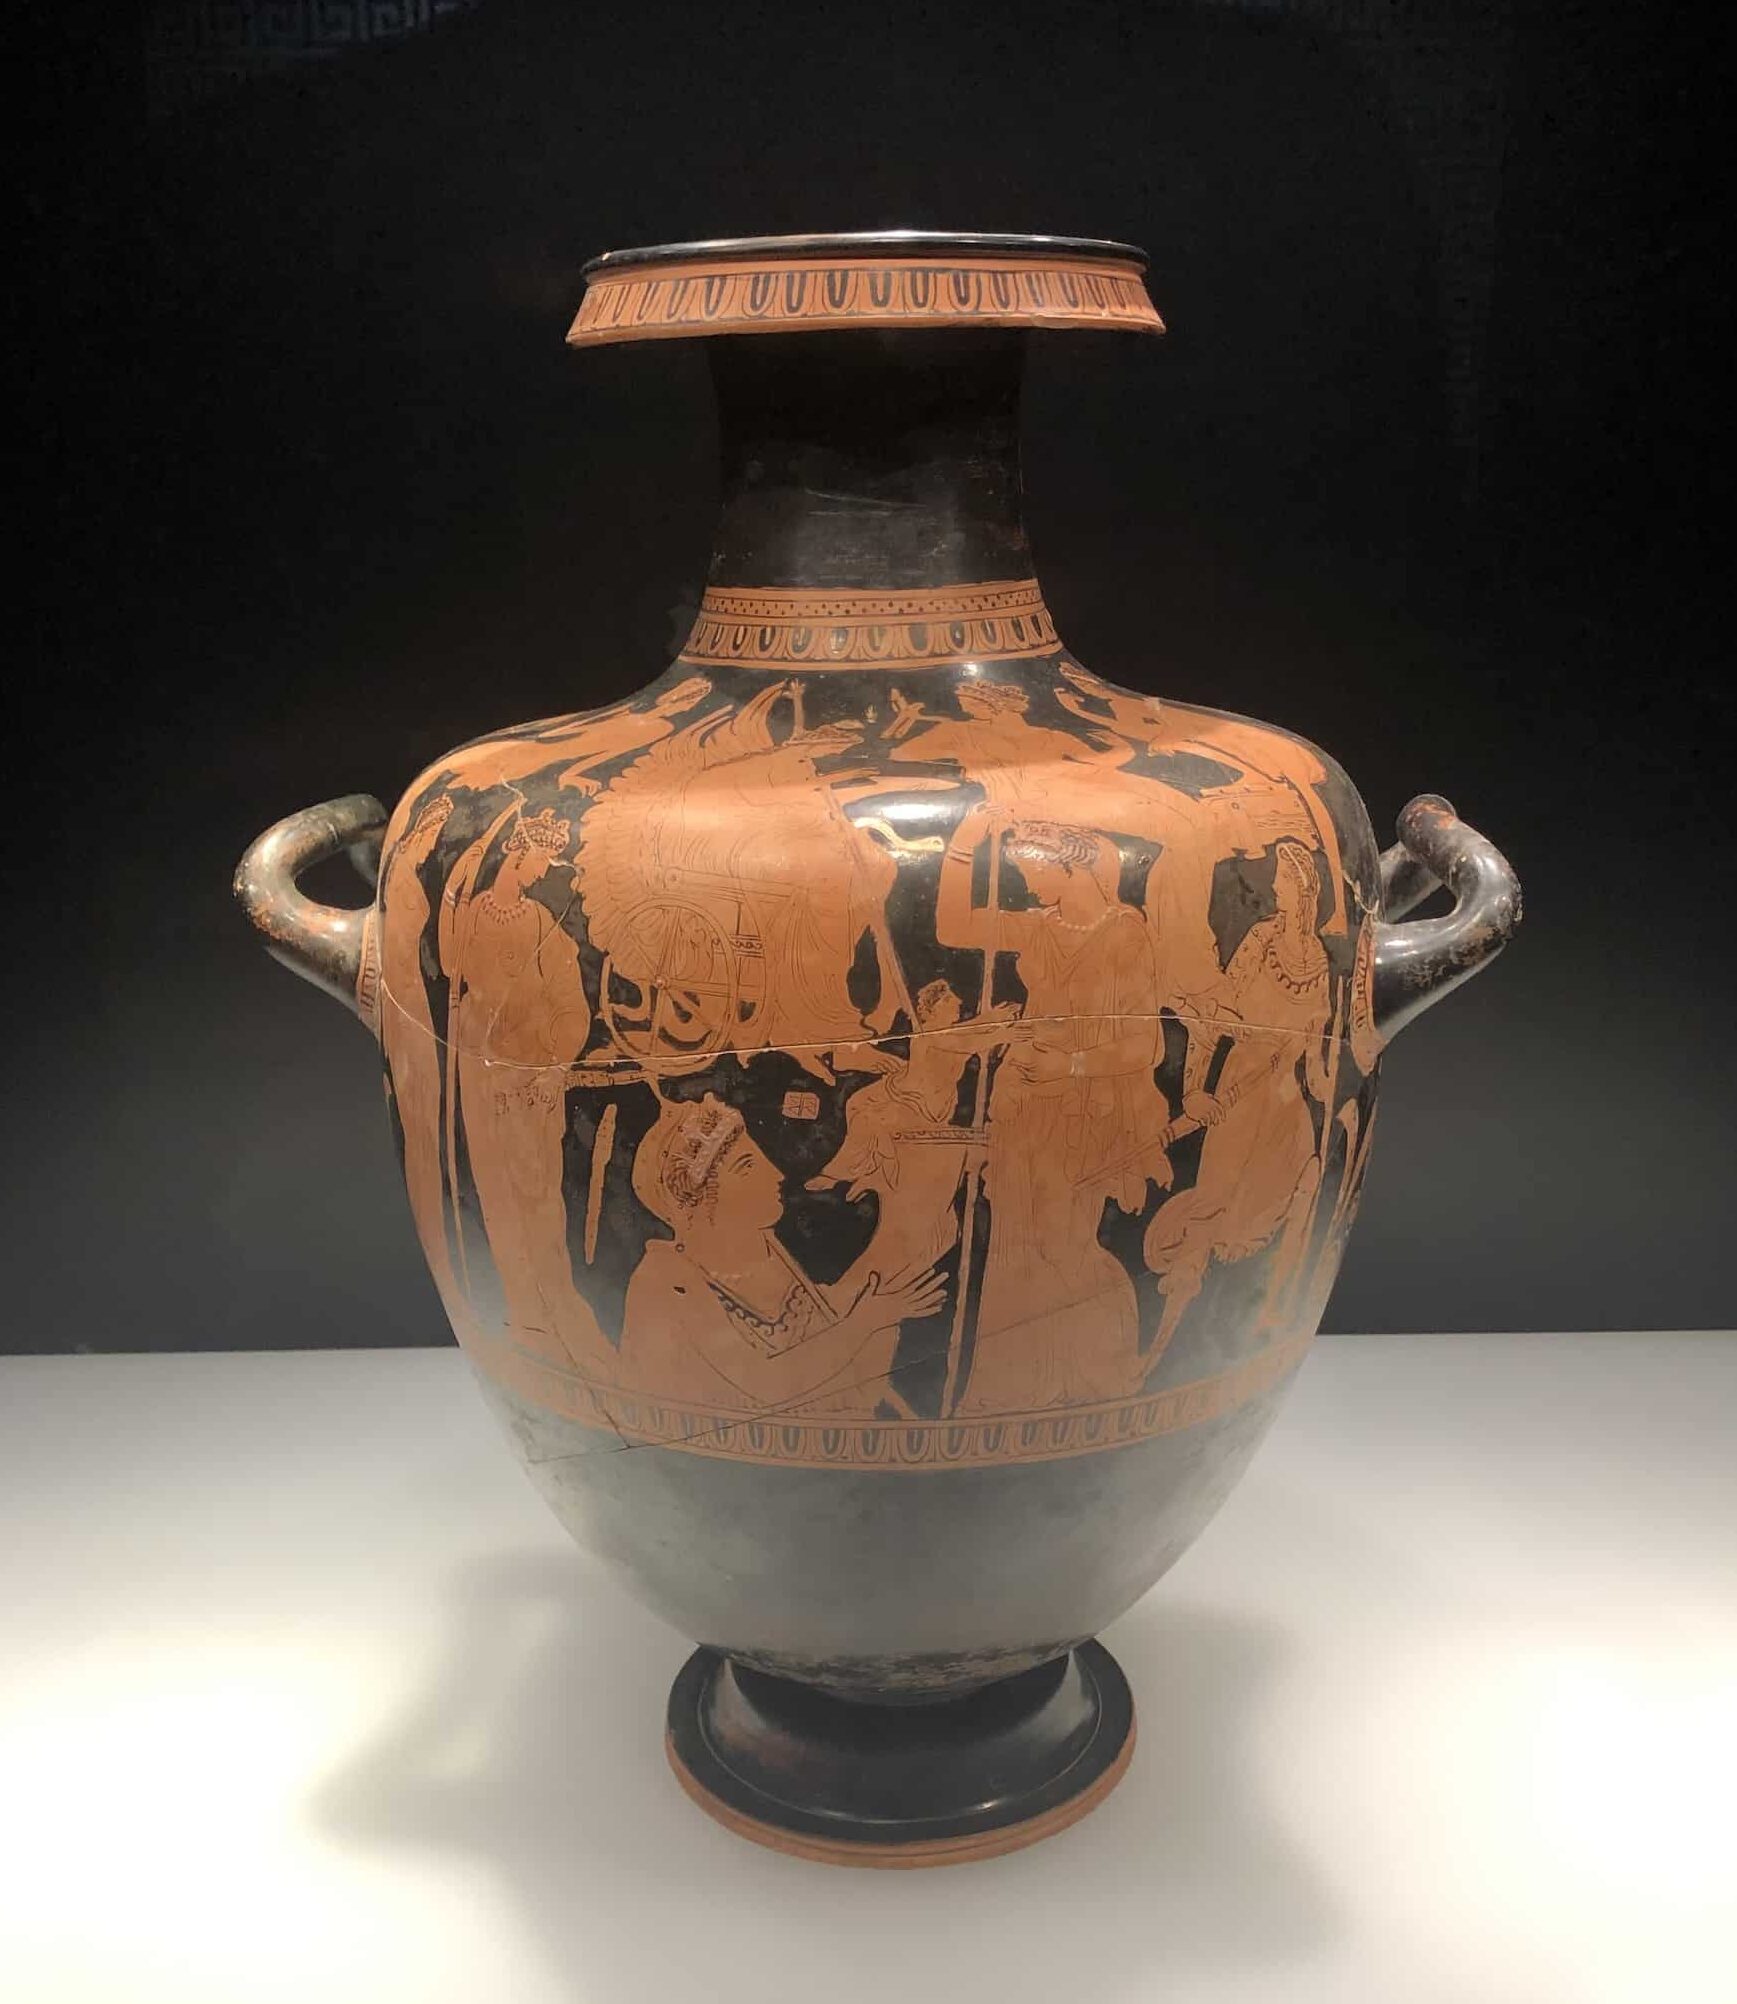 Hydria; terracotta; 5th-4th century BC; Rhodes, Greece at the Istanbul Archaeology Museum in Istanbul, Turkey